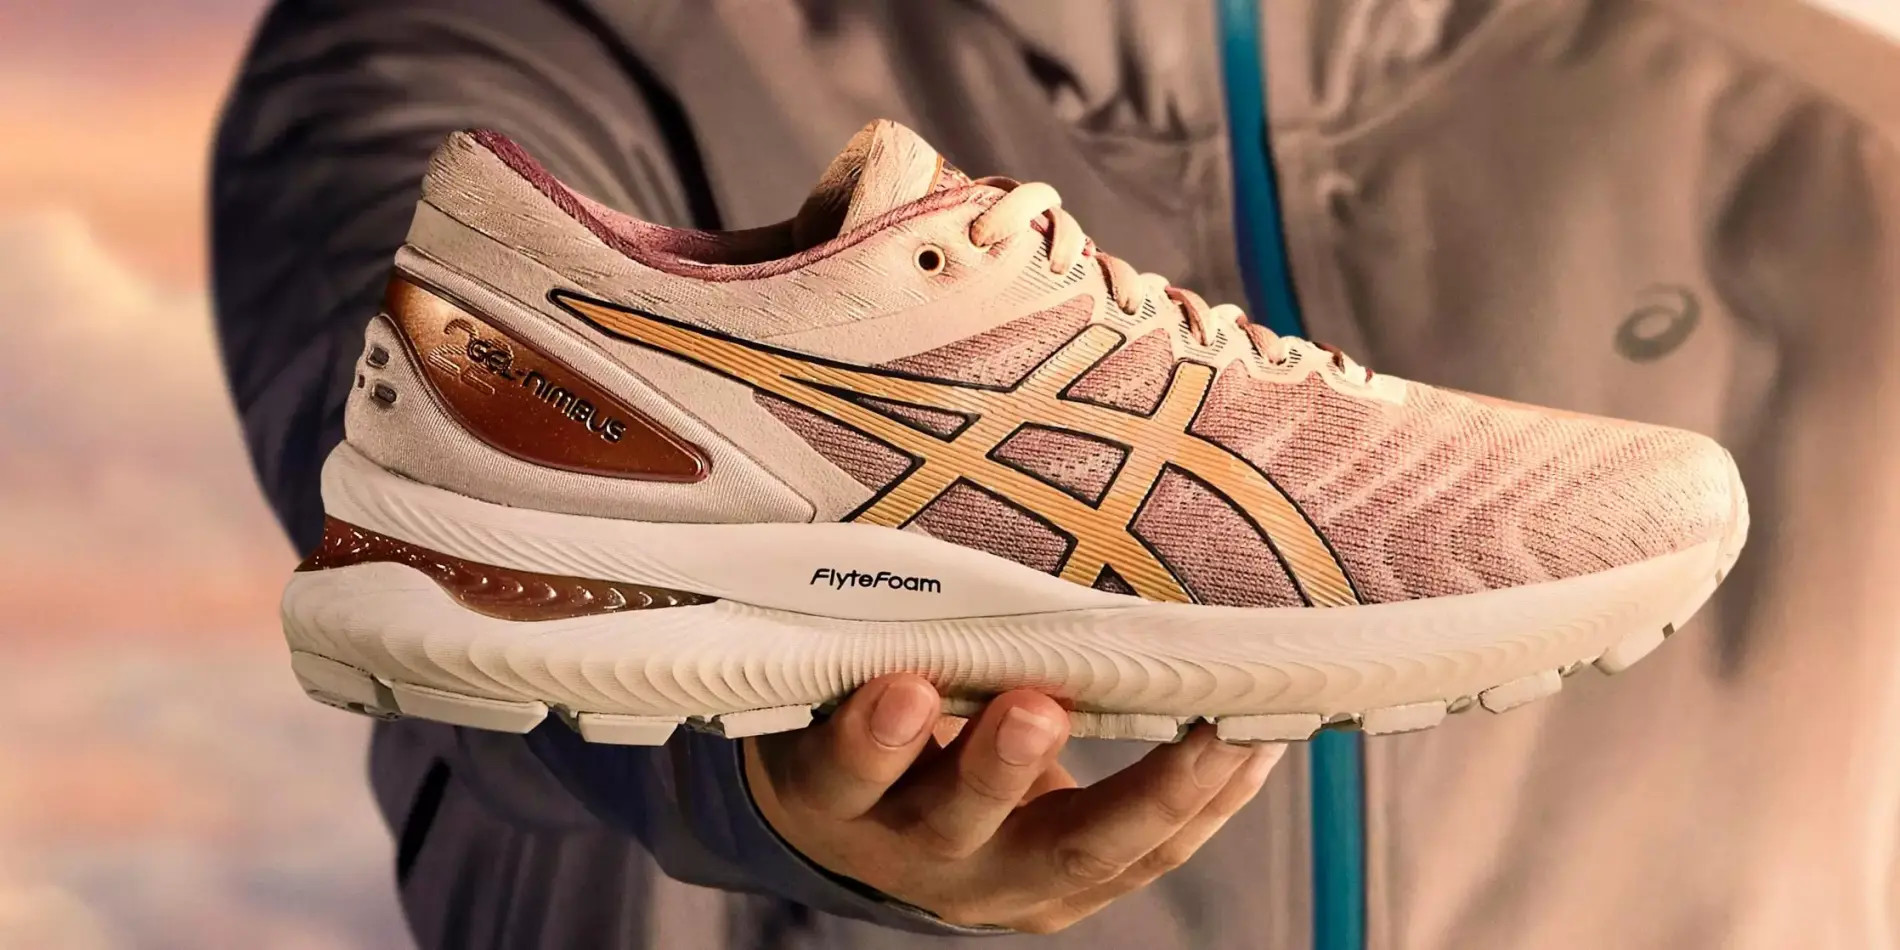 Asics Gel-nimbus 22 Review: 4 Reasons This Running Shoe Is The